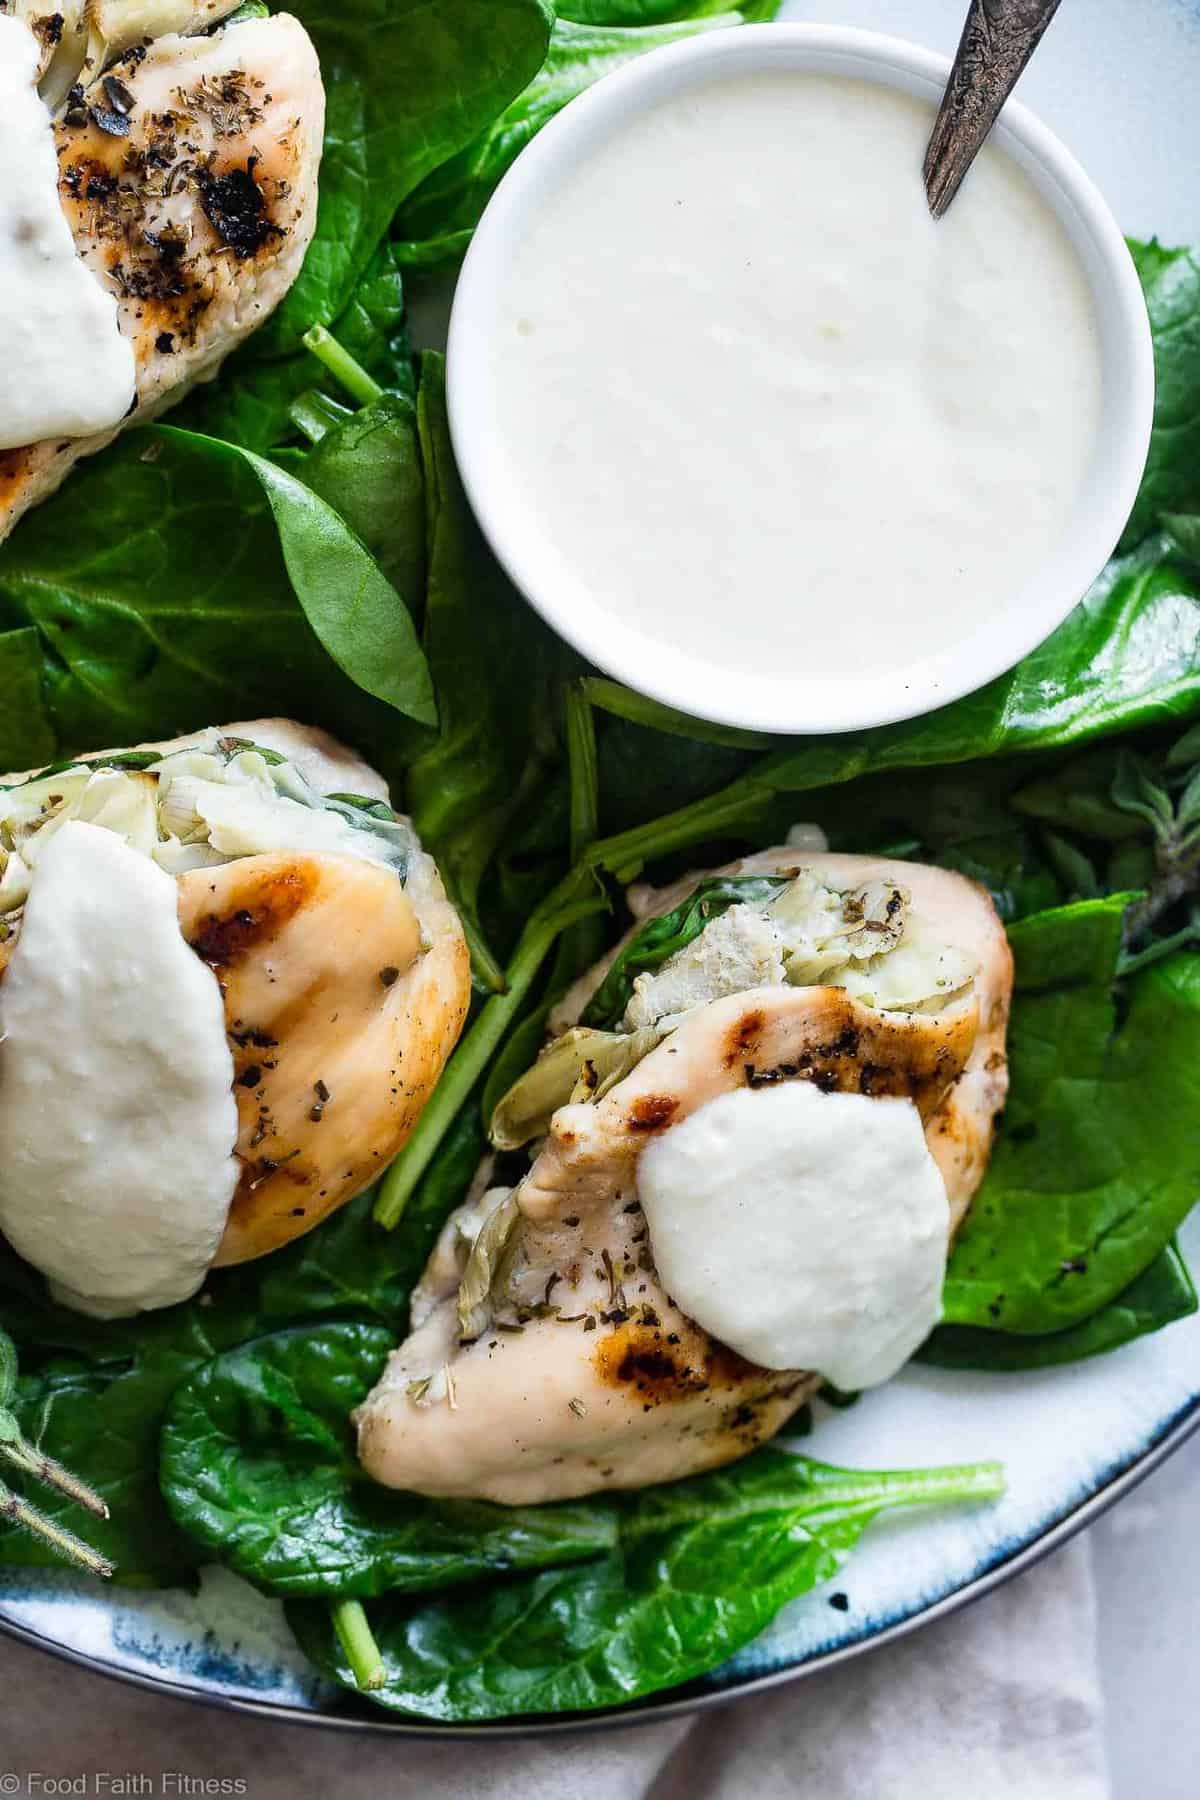 Spinach Artichoke Greek Yogurt Chicken - Chicken is stuffed, grilled and topped with a creamy, Parmesan Greek yogurt sauce! It's a healthy, low carb dinner that's perfect for a weeknight, and only 1 WW Freestyle point! | #Foodfaithfitness | #GreekYogurt #LowCarb #Healthy #Glutenfree #ChickenDinner